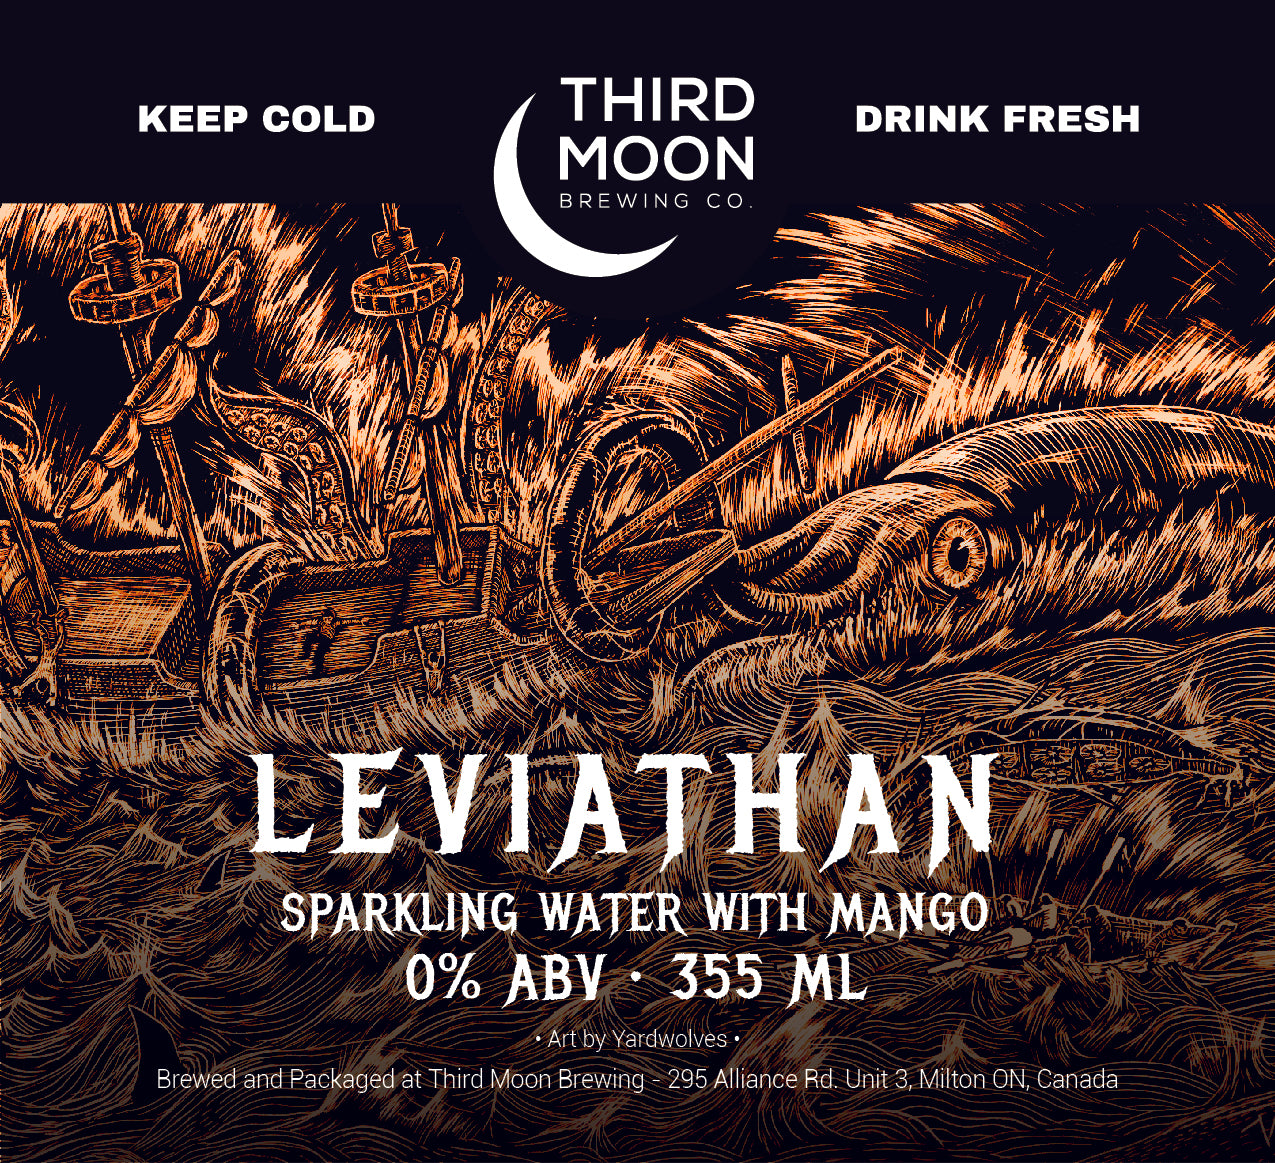 Sparkling Water - 4-pk of "Leviathan (Mango)" 355mL cans